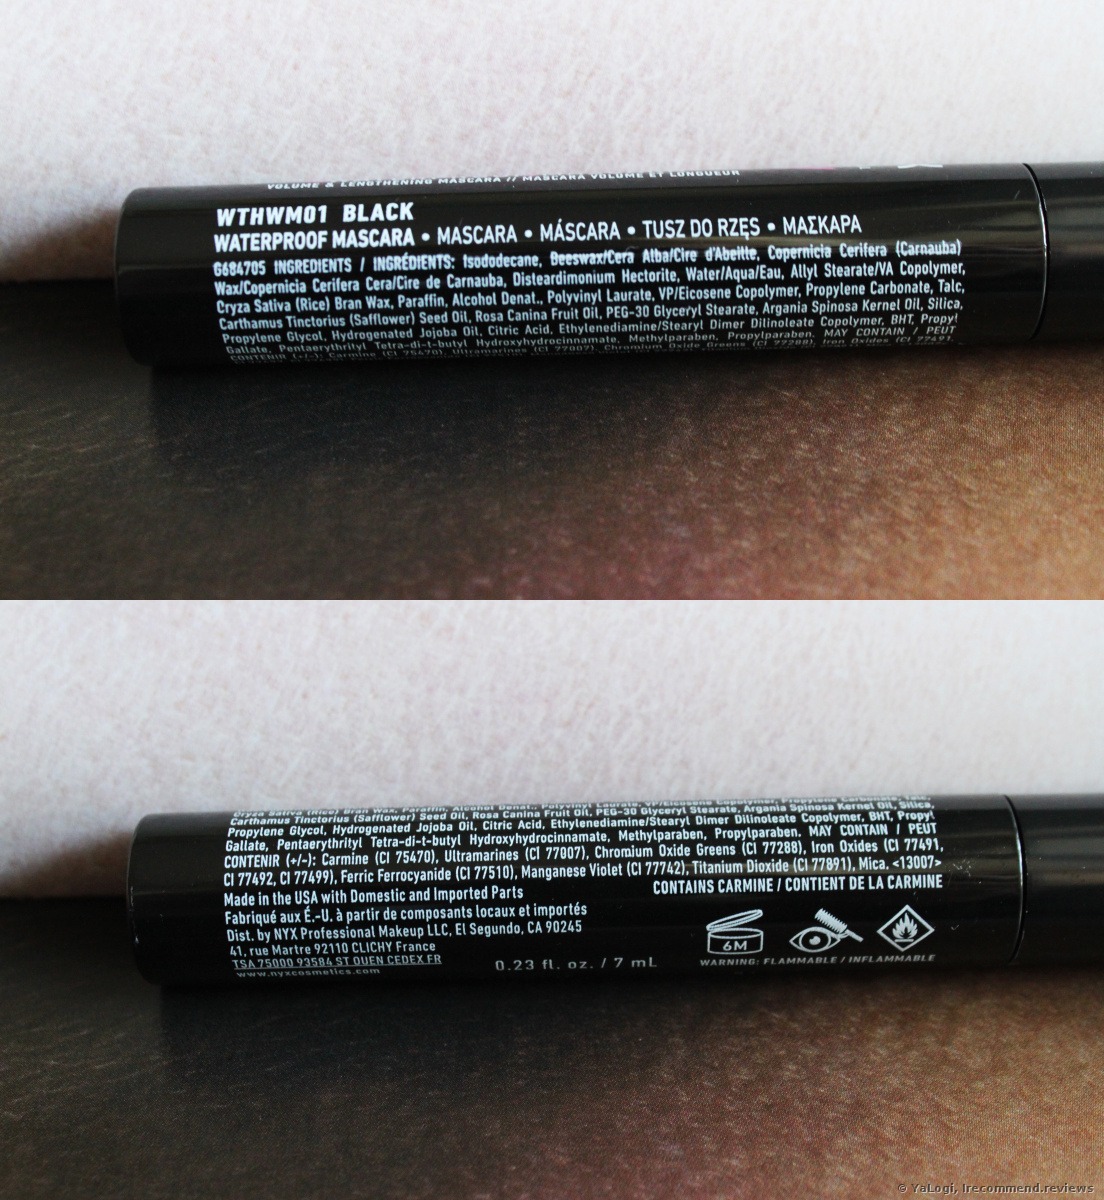 Mascara The it shots worth really never » awesome. hype? Hype BEFORE/AFTER is mascara - | NYX good Waterproof Worth This «Is the Consumer reviews but